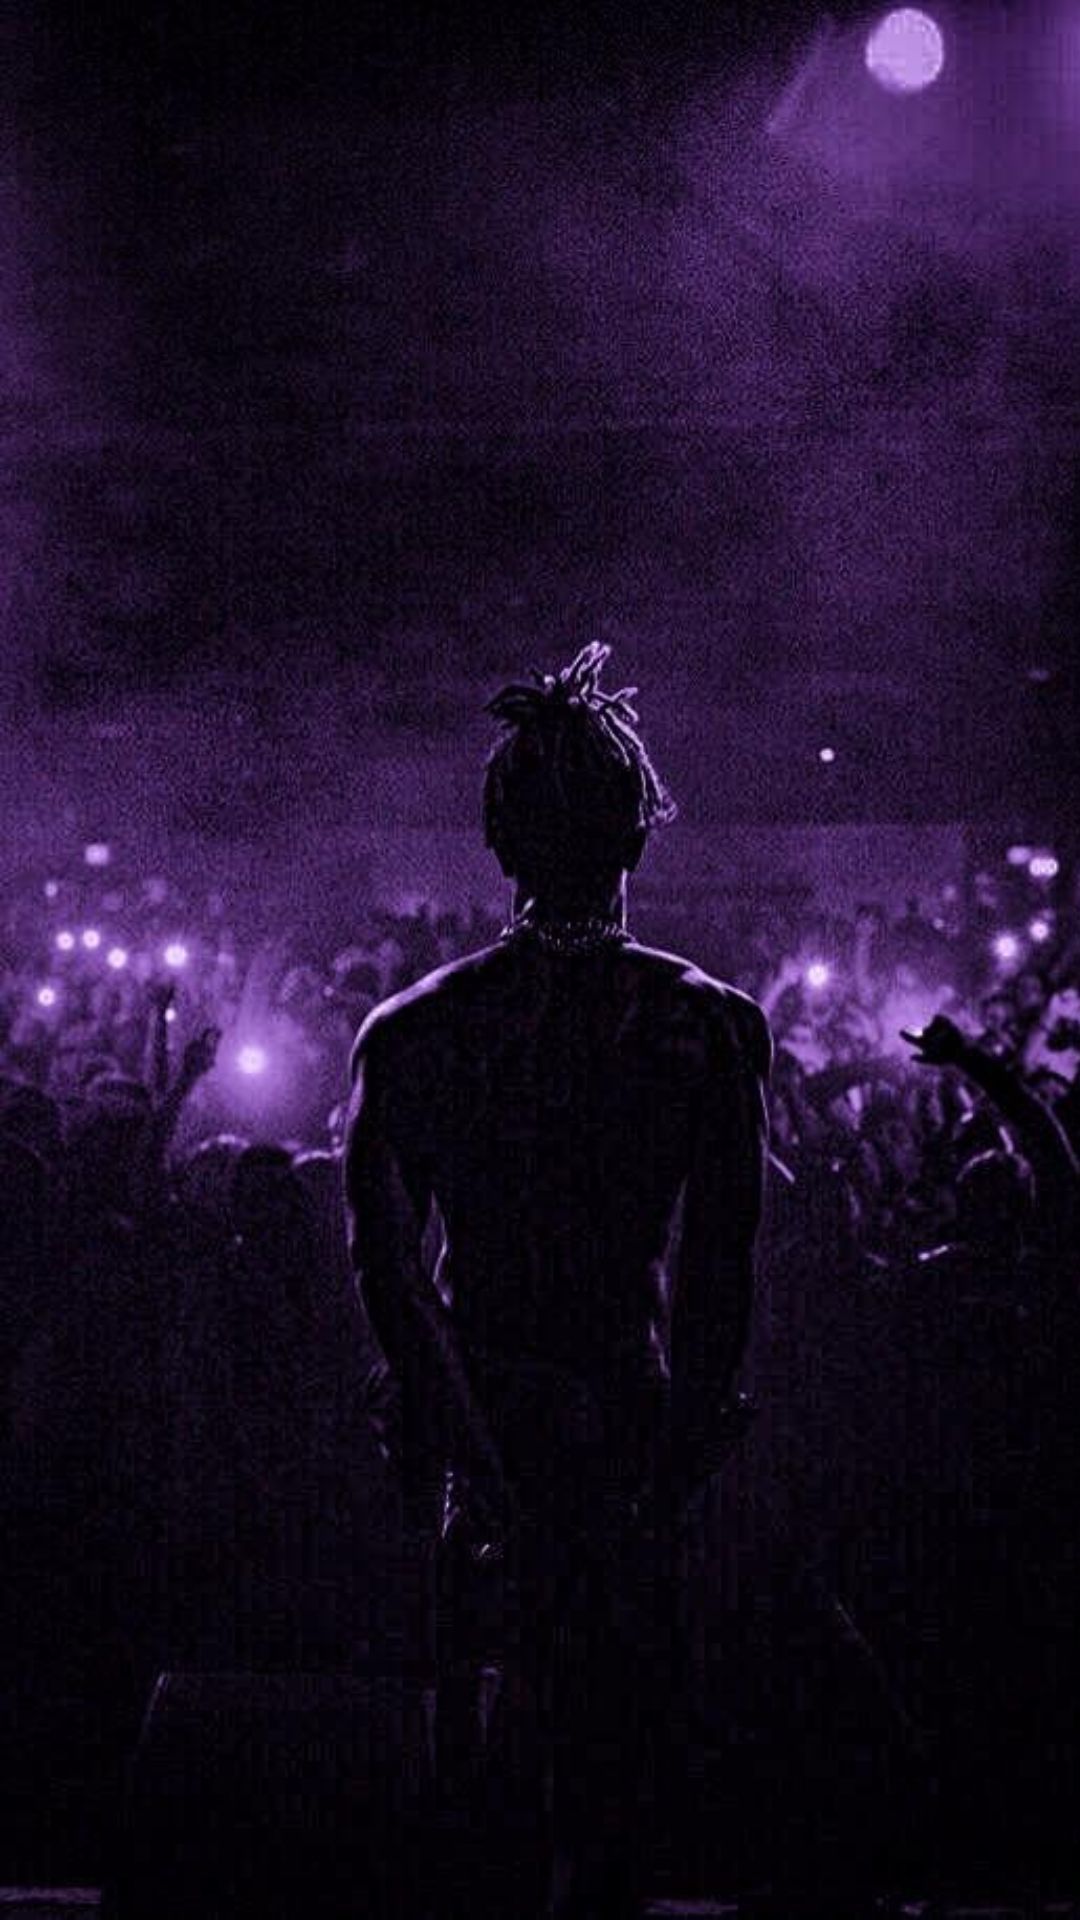 IPhone wallpaper with Travis Scott in front of a crowd - XXXTentacion